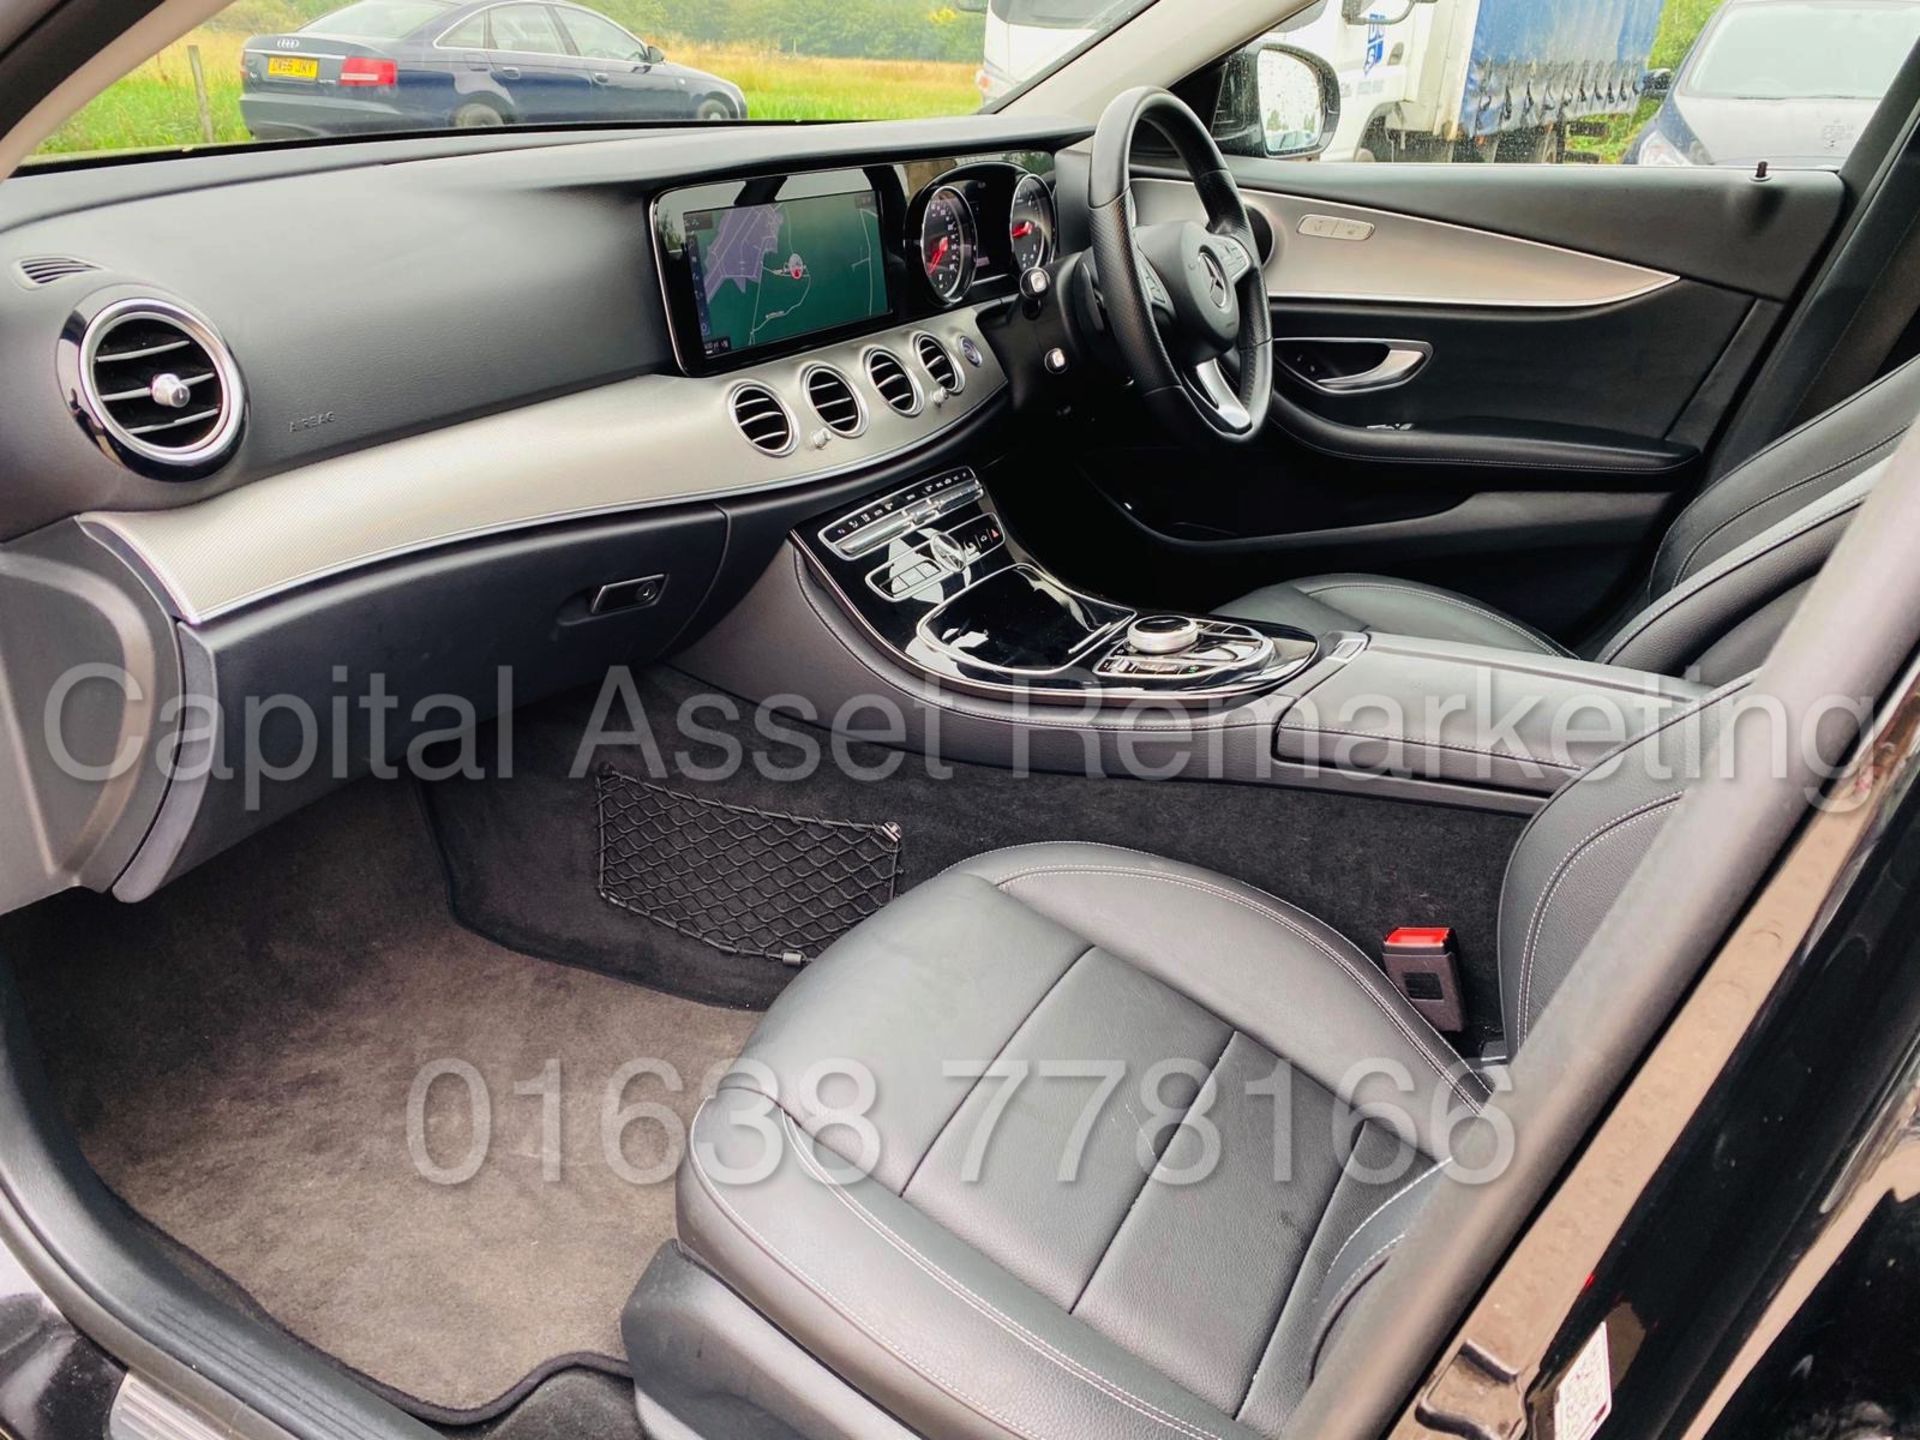 (On Sale) MERCEDES-BENZ E220D *SALOON* (2018 - NEW MODEL) '9-G TRONIC AUTO - LEATHER - SAT NAV' - Image 24 of 52